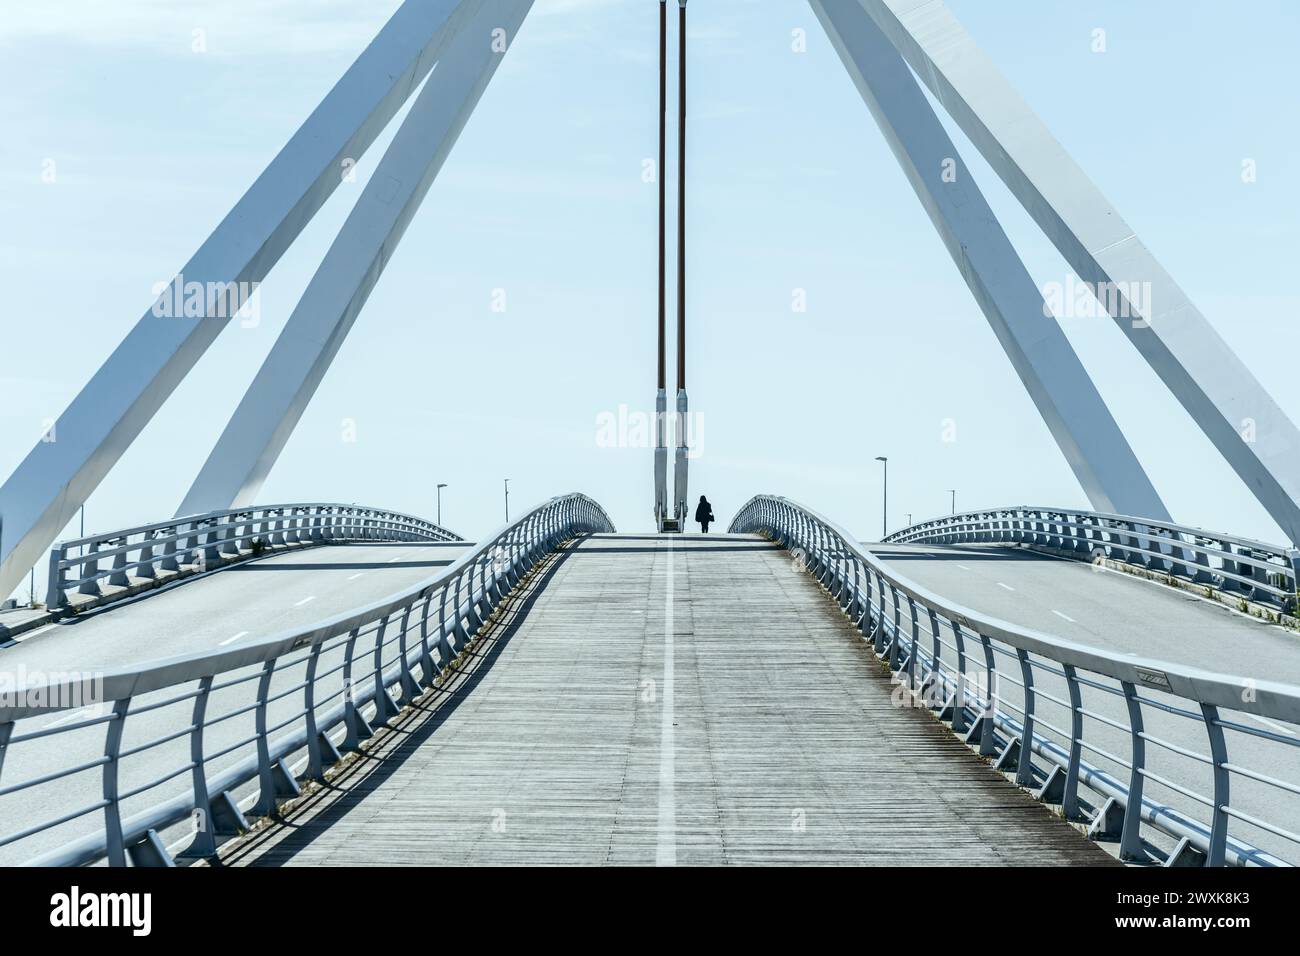 Metal structure of a small bridge with hanging metal structure, walkways and wooden floors for pedestrians on a nice sunny day with a lone pedestrian Stock Photo